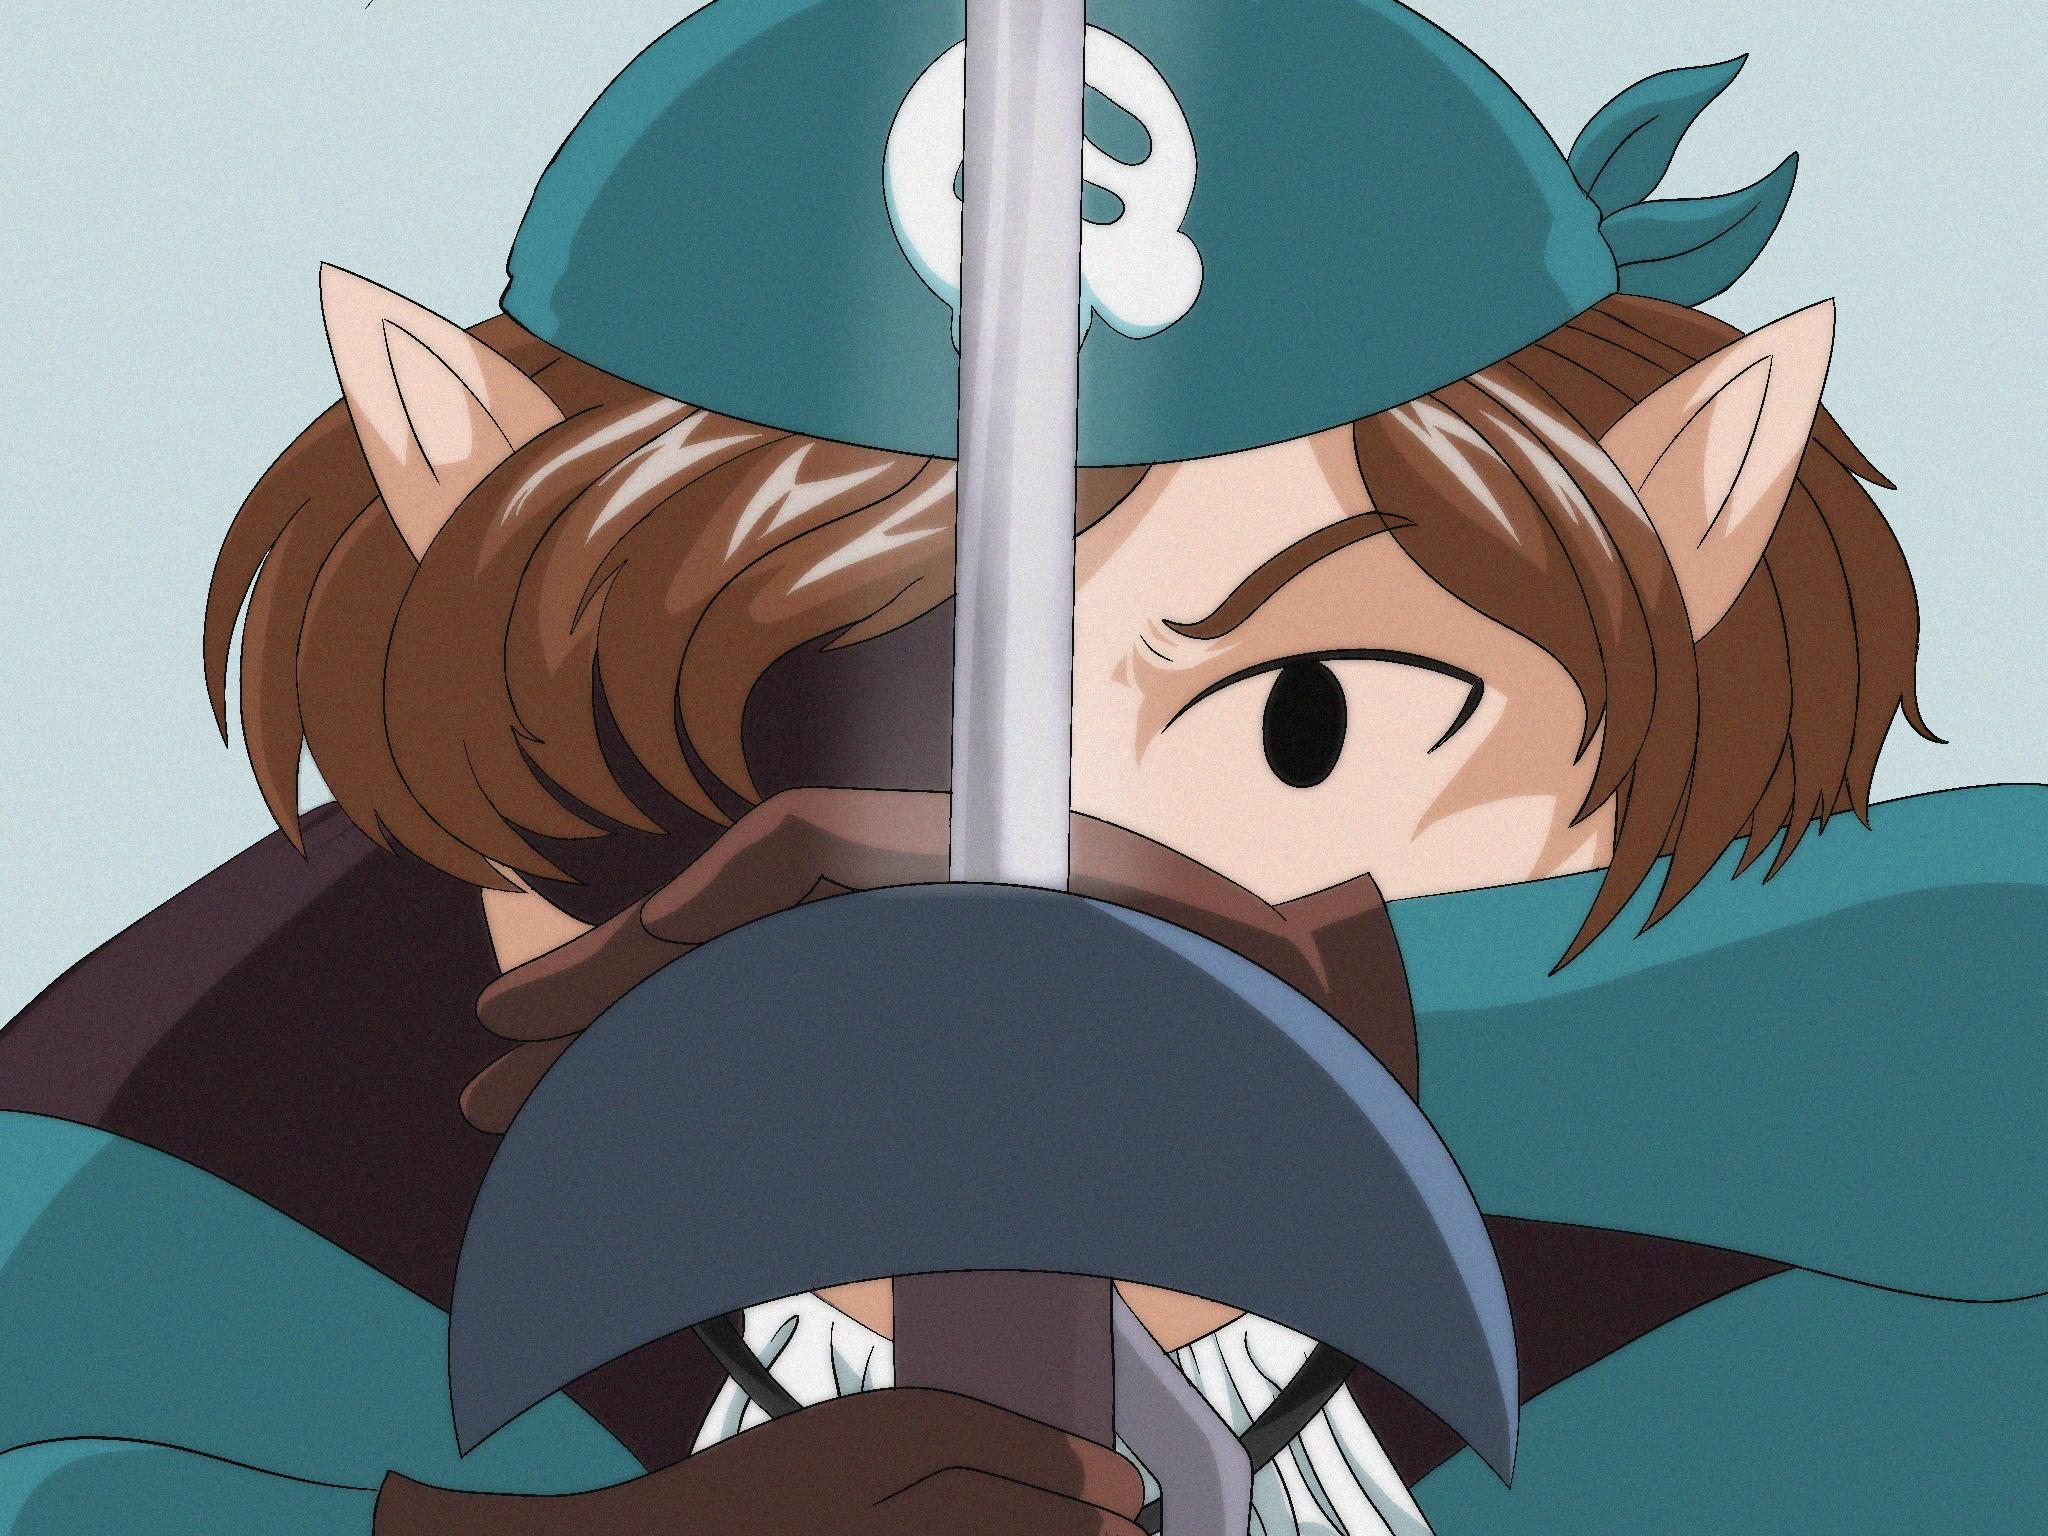 Teal having a fierce expression as they wield thier saber. The blade of the saber has a faint glow.